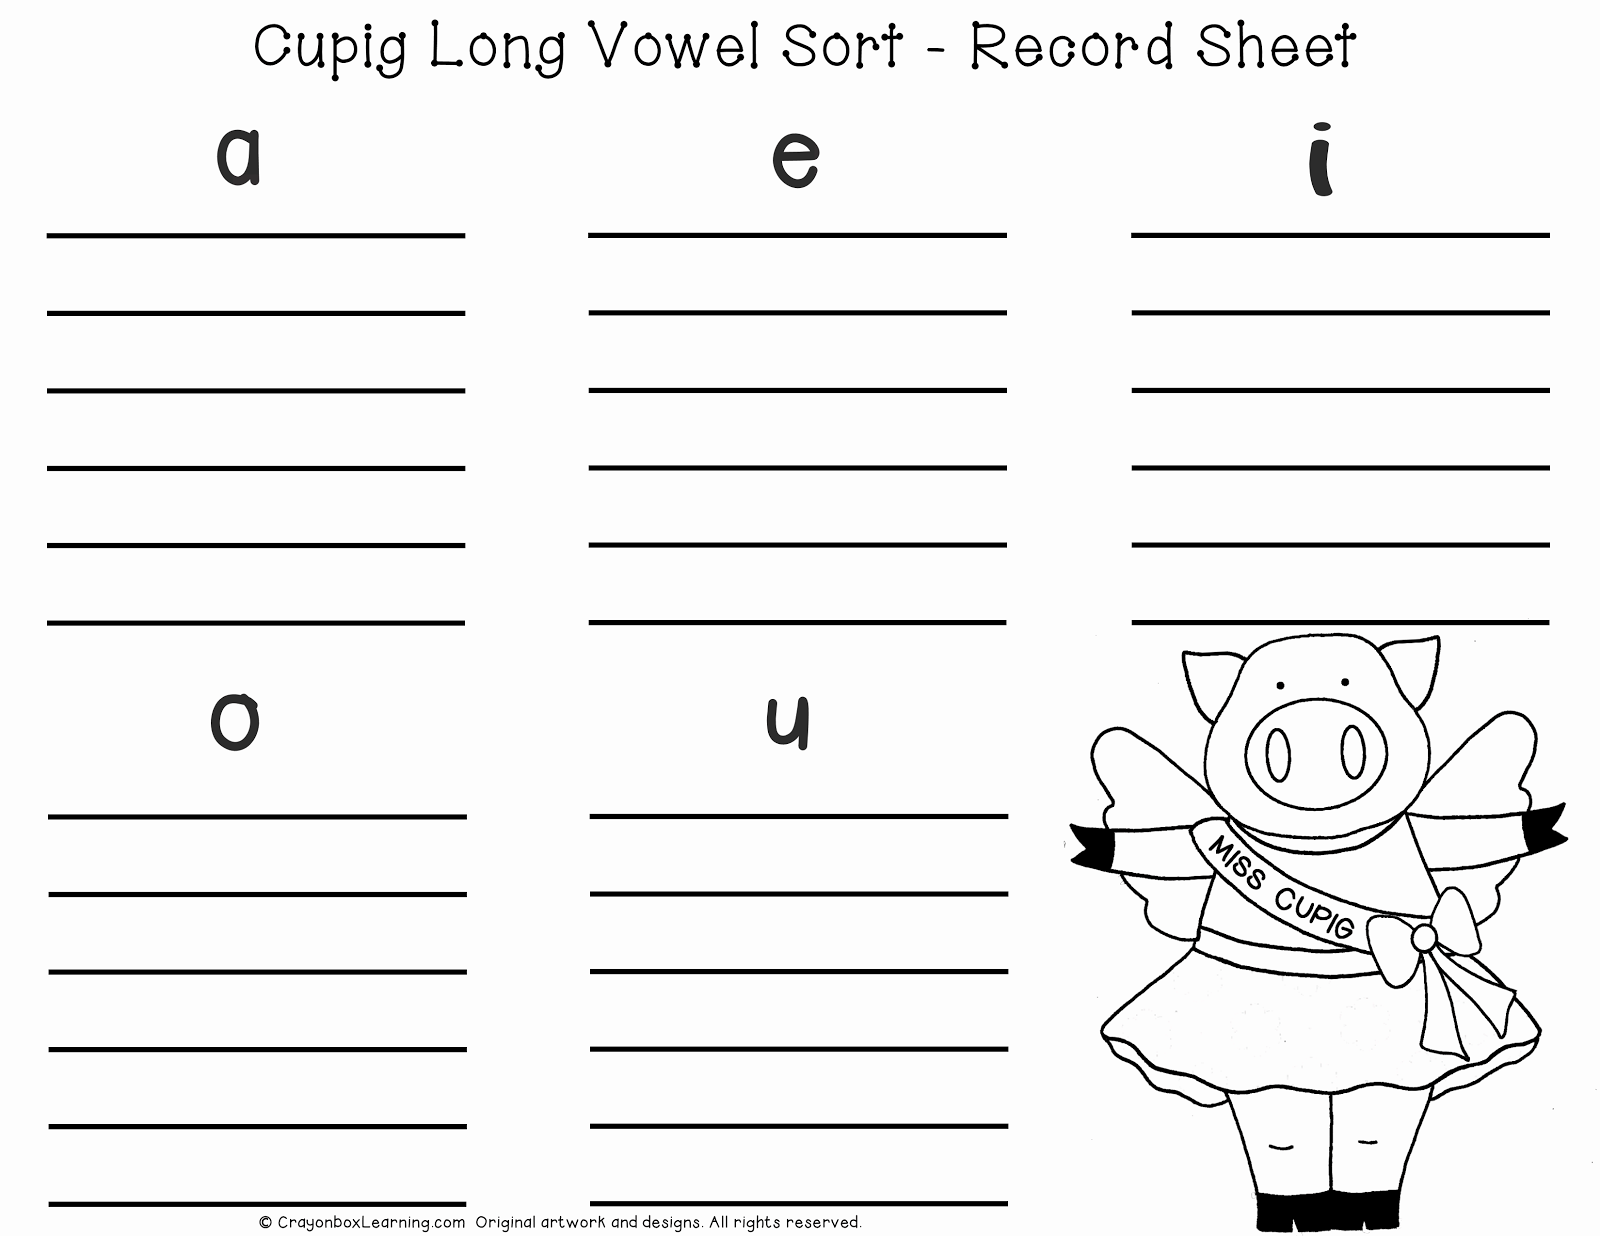 How to write vowels